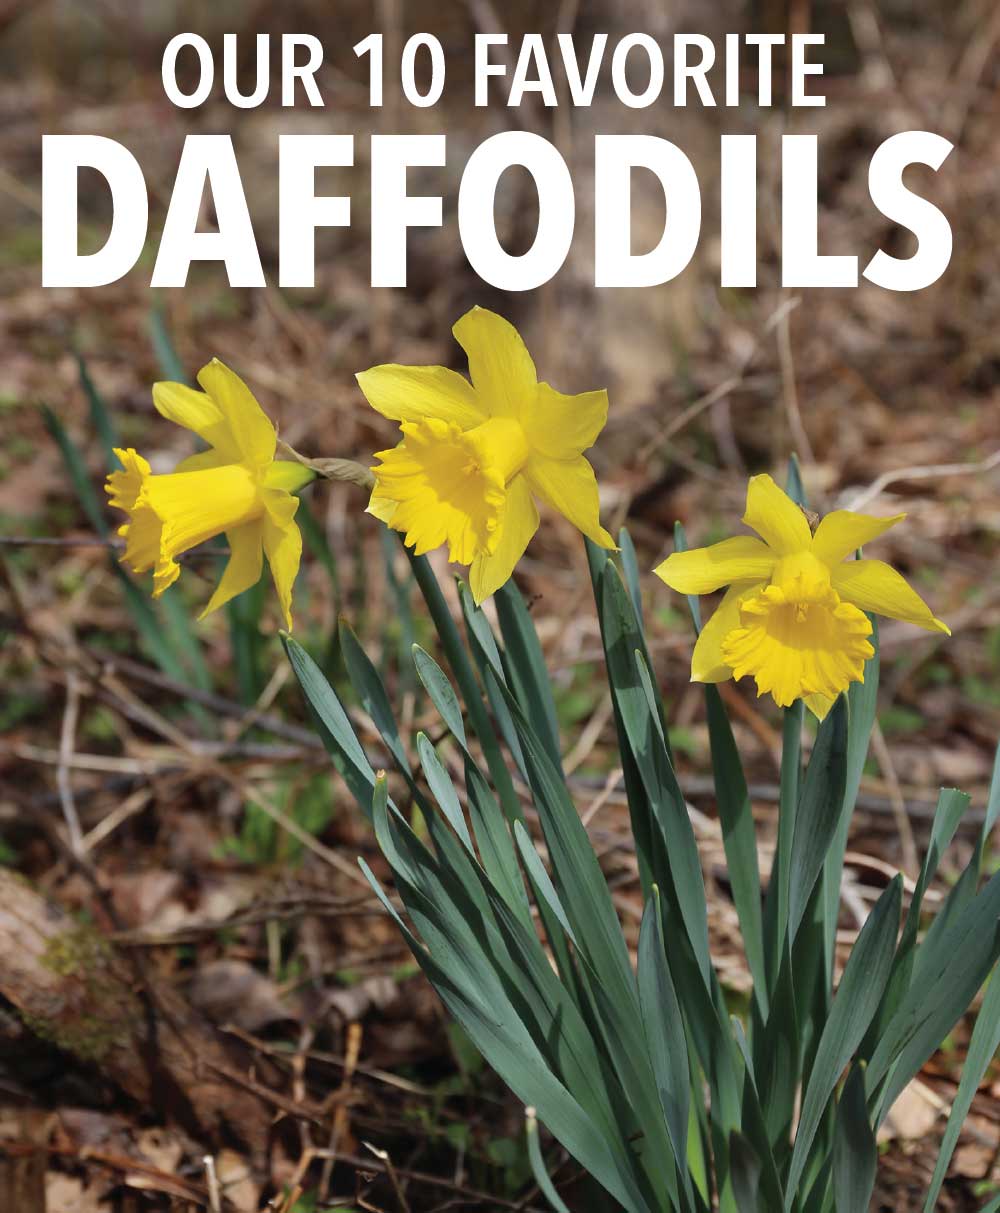 Our Top 10 Daffodils and Why We Love Them